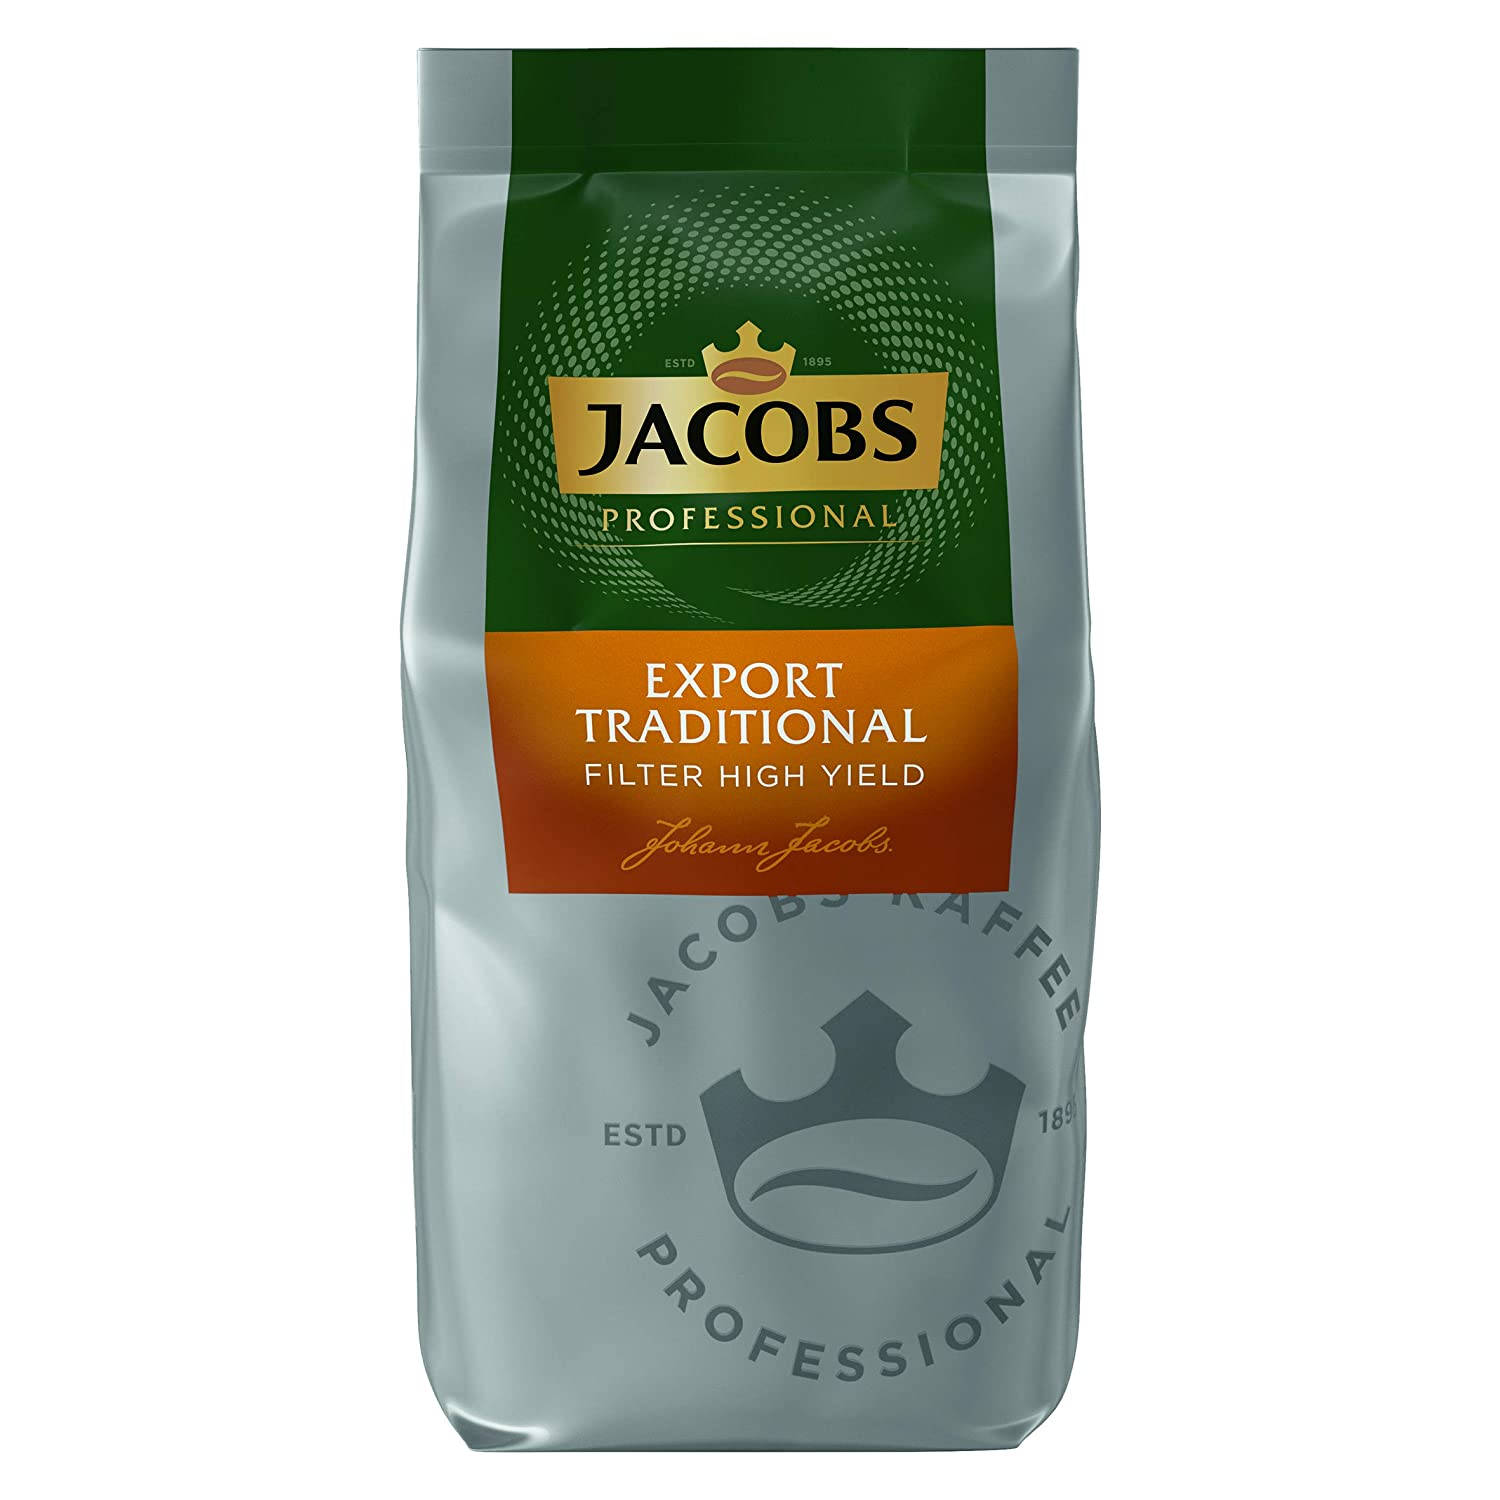 Professional Press) French JACOBS (Filtermaschinen, Export 2x800g Filterkaffee Traditional Yield High